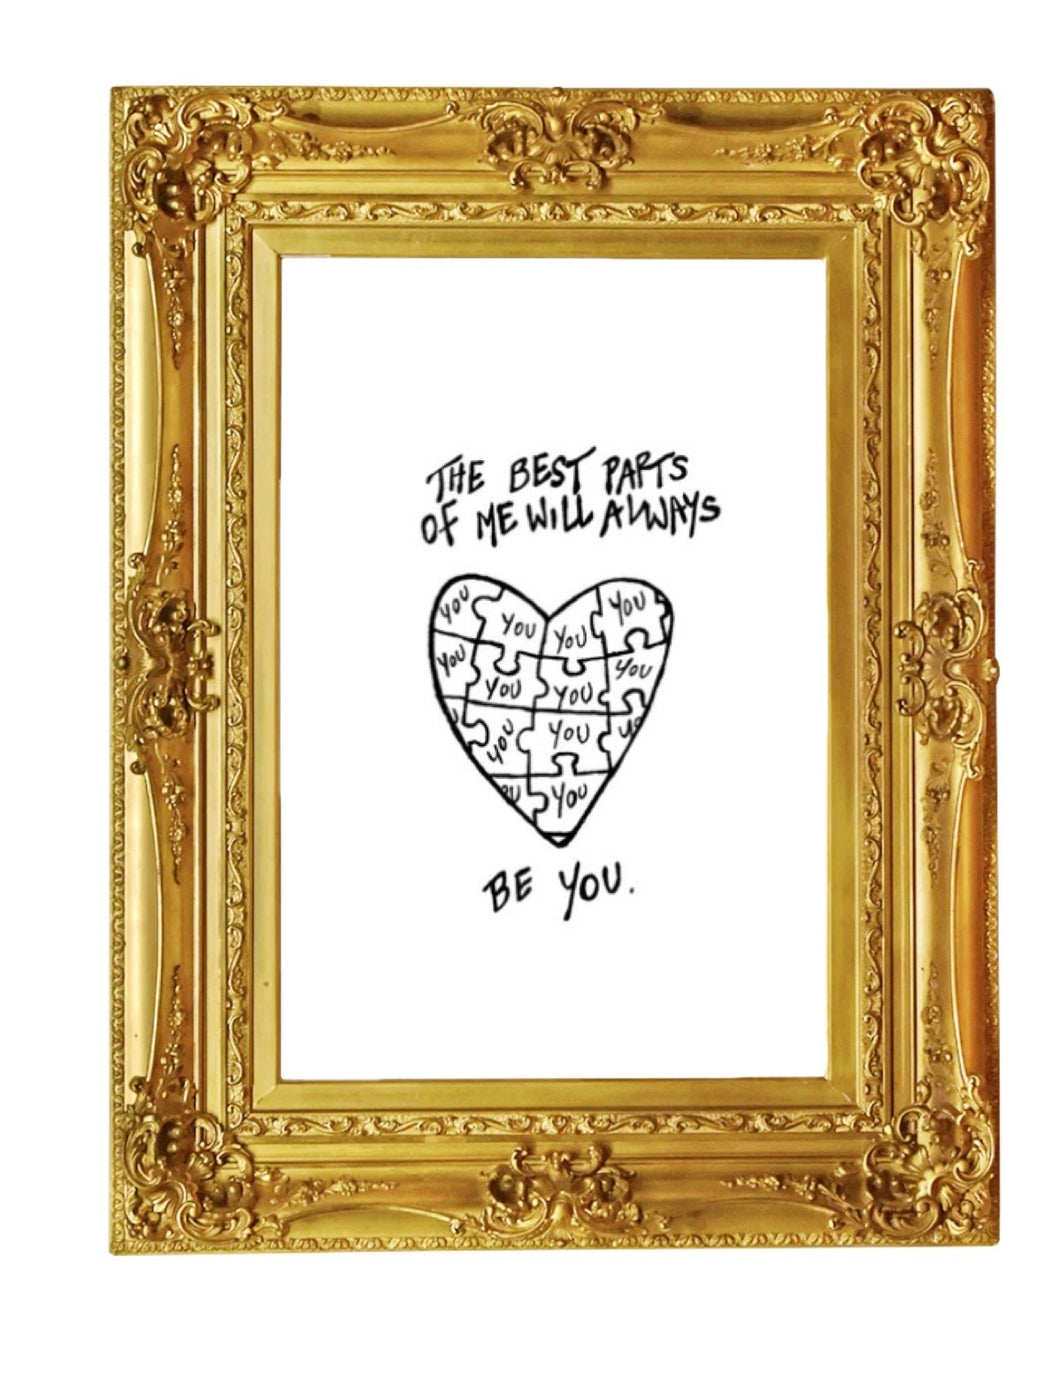 The Best Parts of Me Print